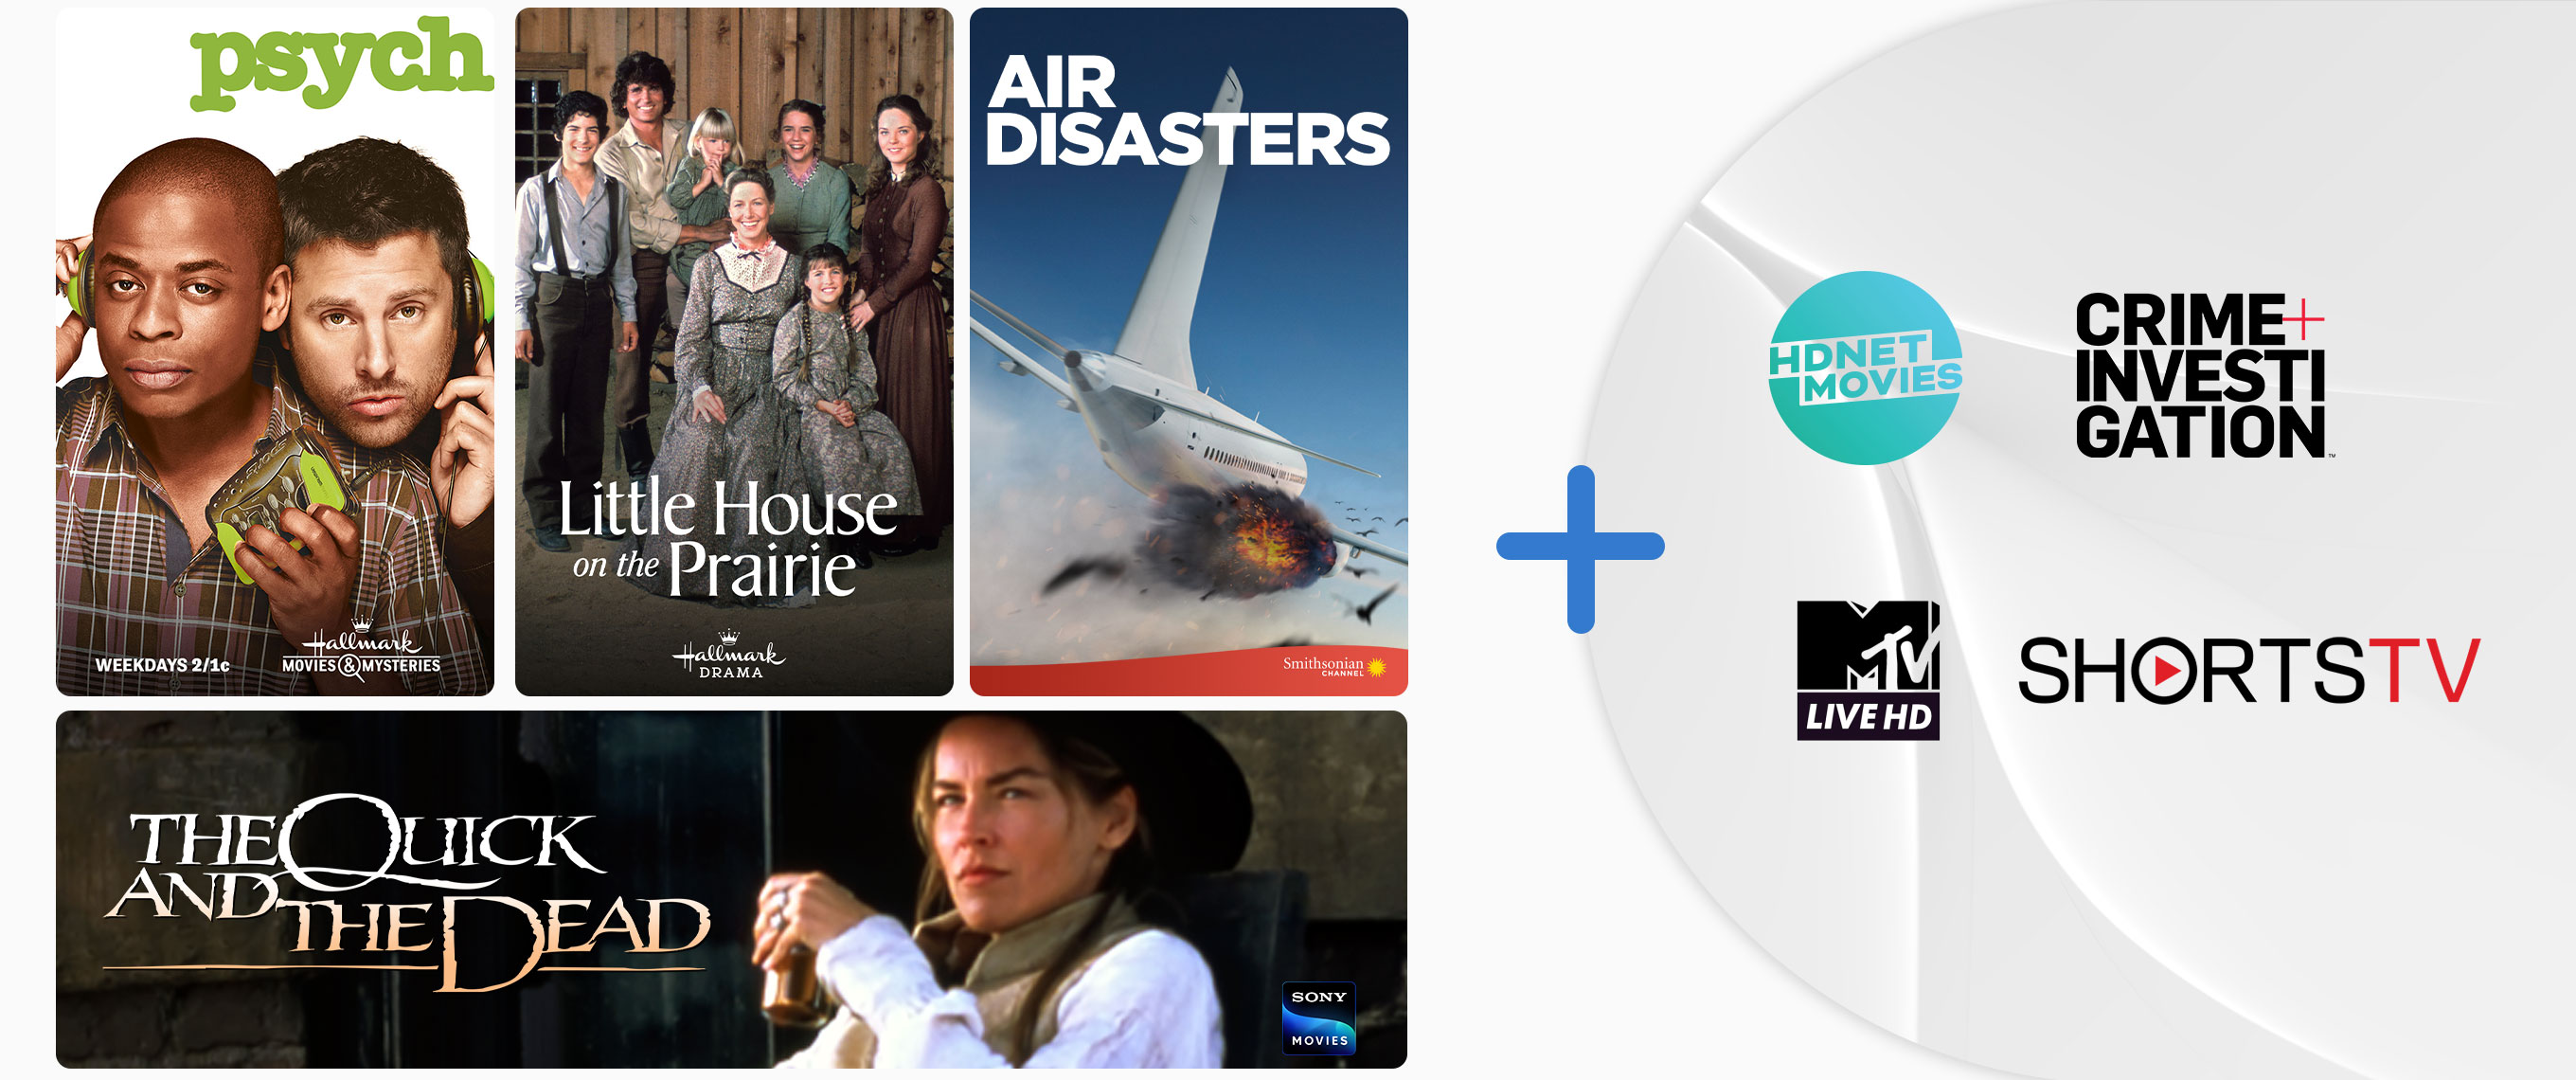 Mysteries, Movies, Music and More! Add DIRECTV Movies Extra Pack